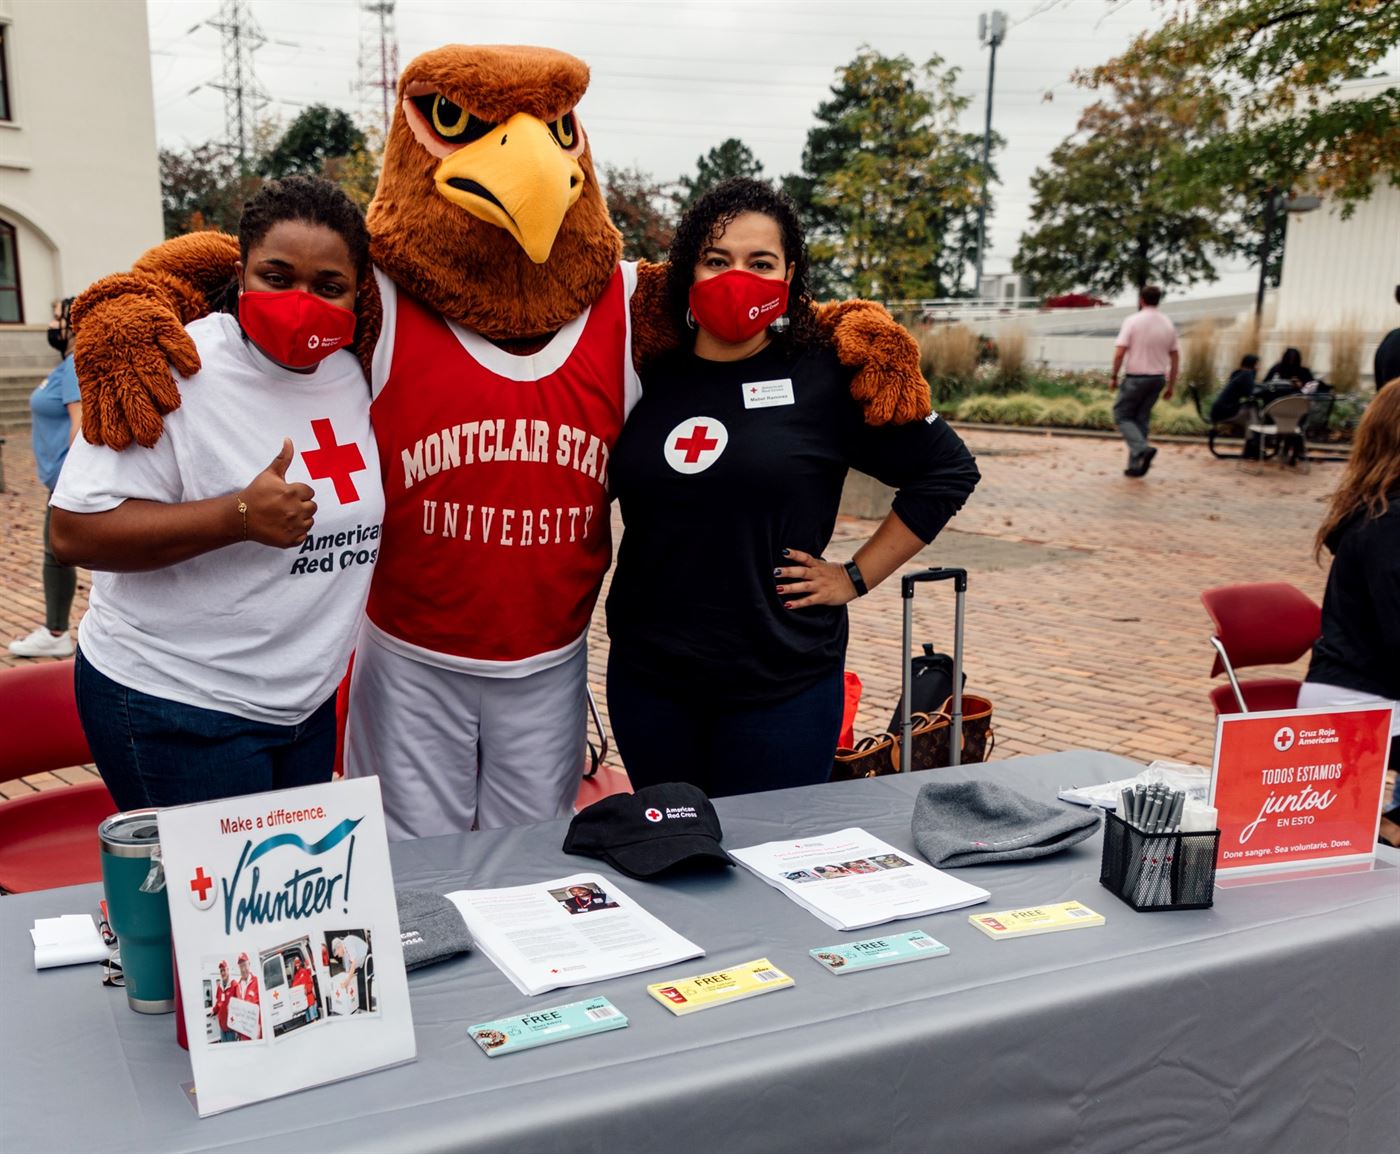 T'lea Smith, volunteer services recruitment specialist (left) and Mabel Ramirez, volunteer services senior engagement specialist (right), from the American Red Cross, at the Student Center Quad. Photo courtesy of Karsten Englander